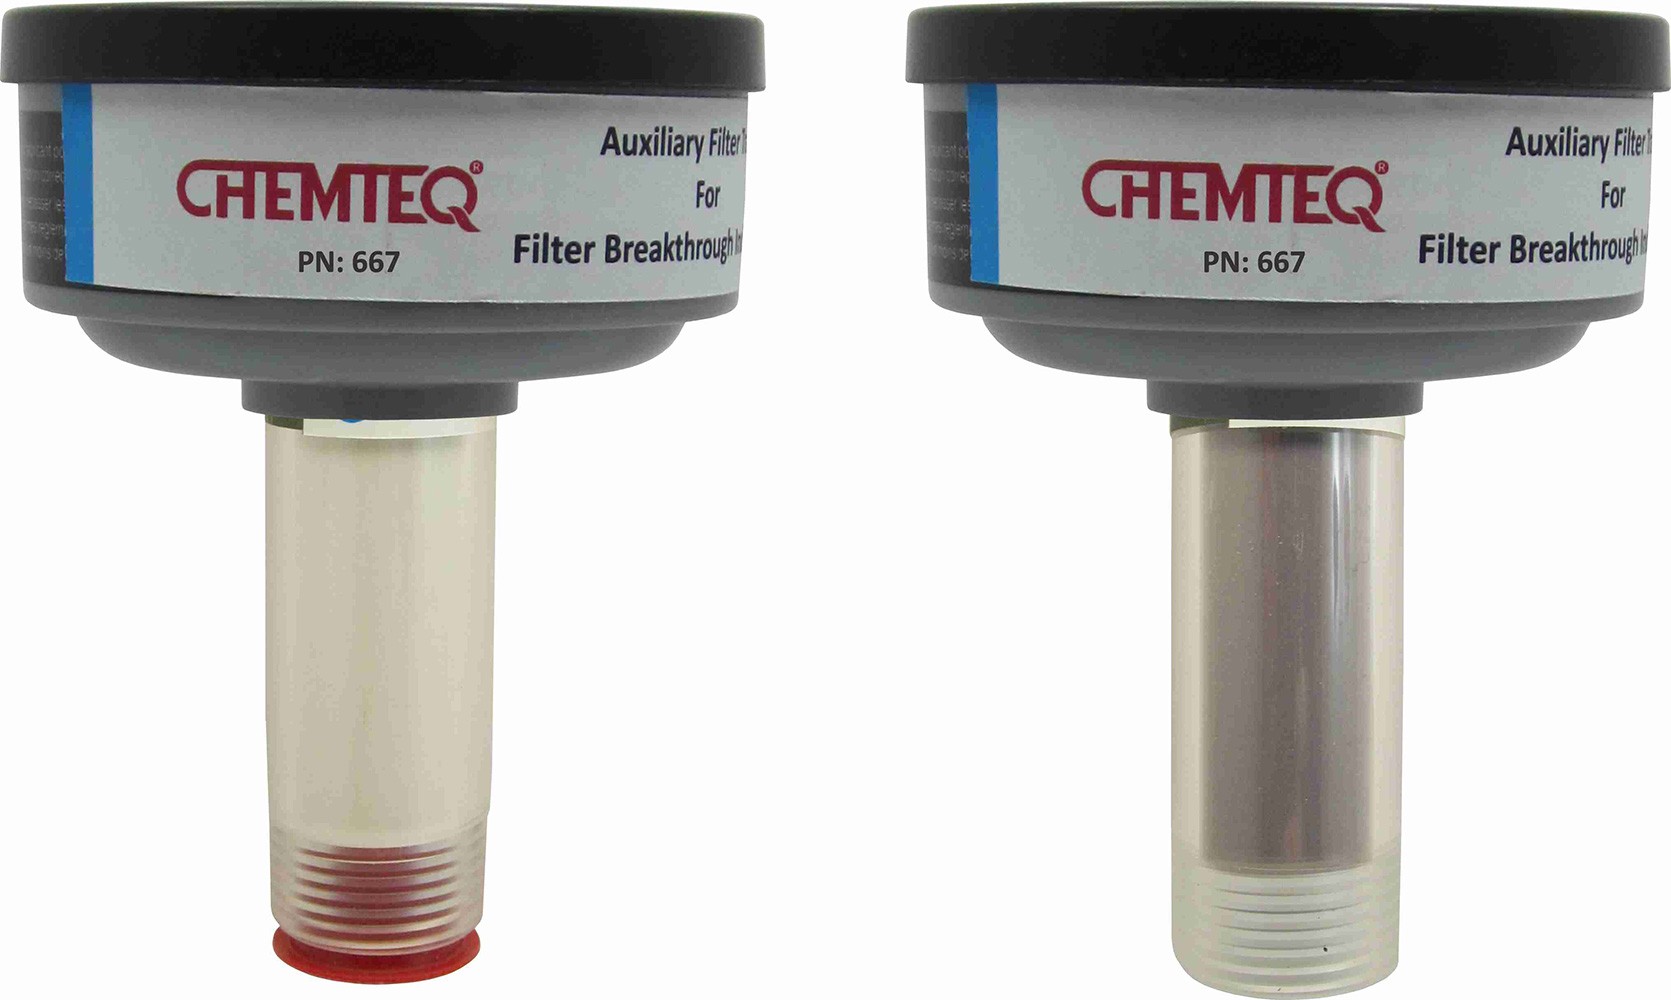 Chlorine Dioxide Breakthrough Indicator (BTI-AFT) is filter change indicator with auxiliary filter trap designed to provide real time indication of breakthrough of chlorine dioxide.